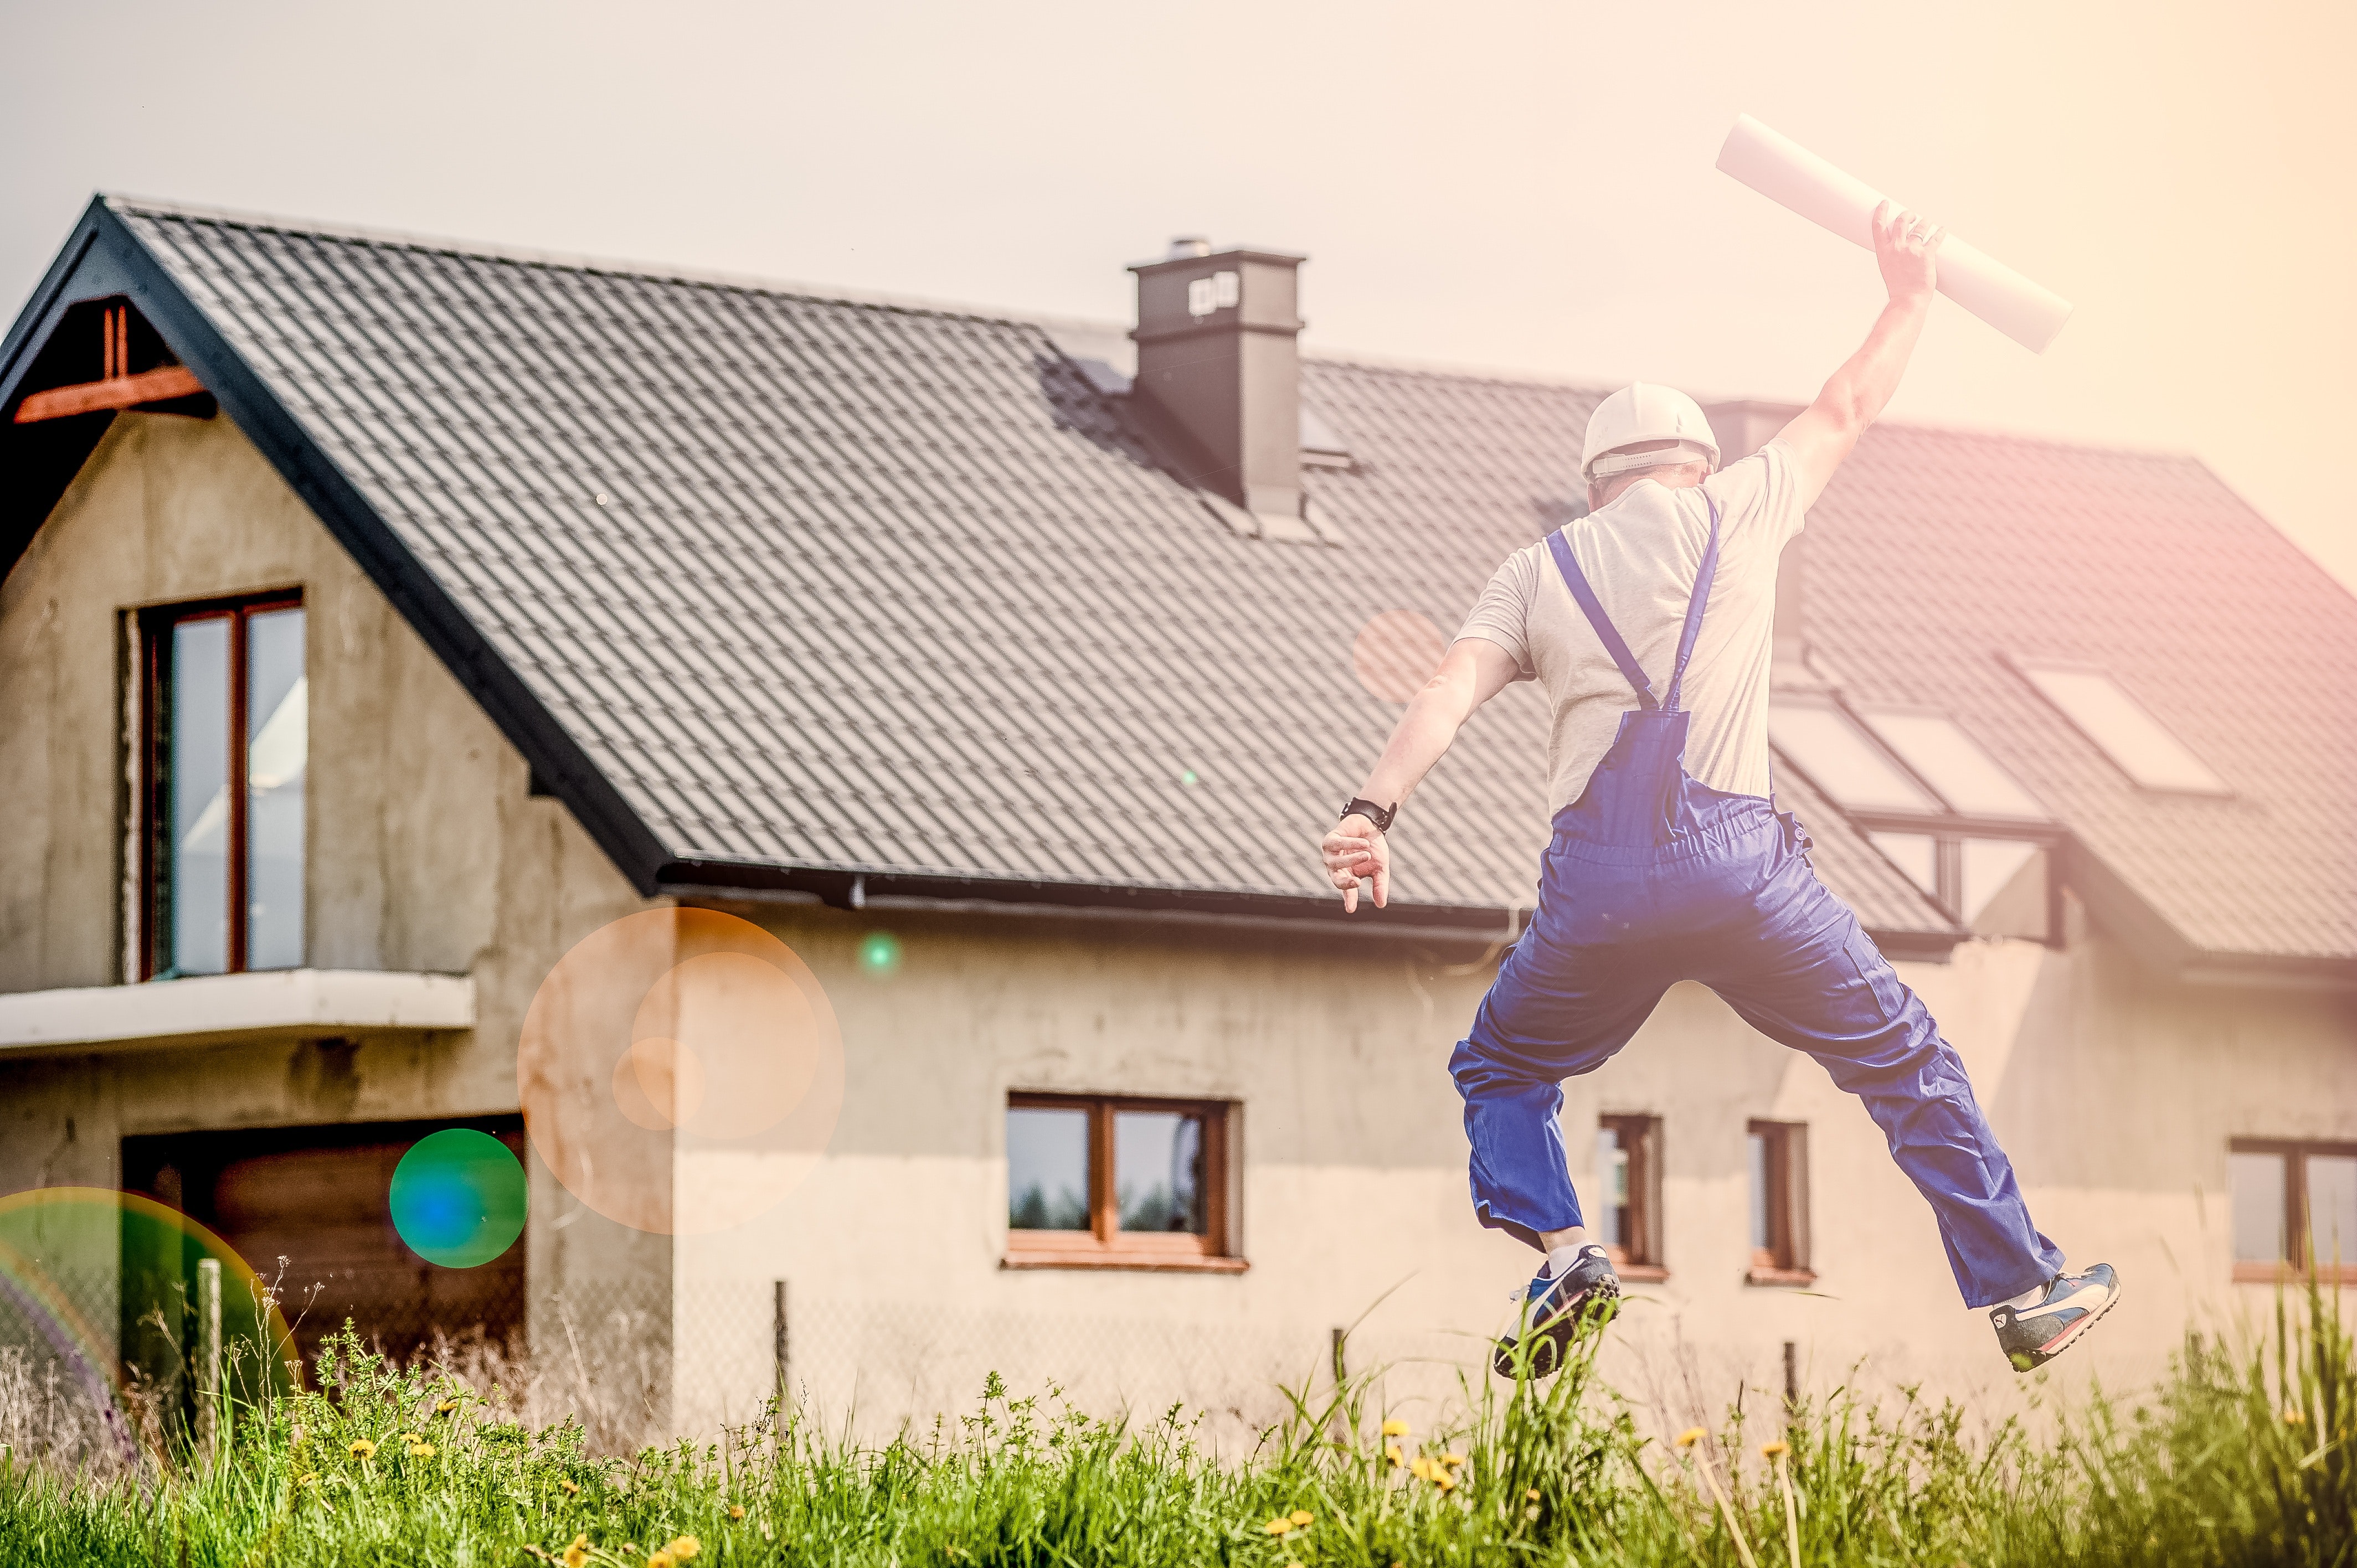 Image of joyous construction worker in front of a house